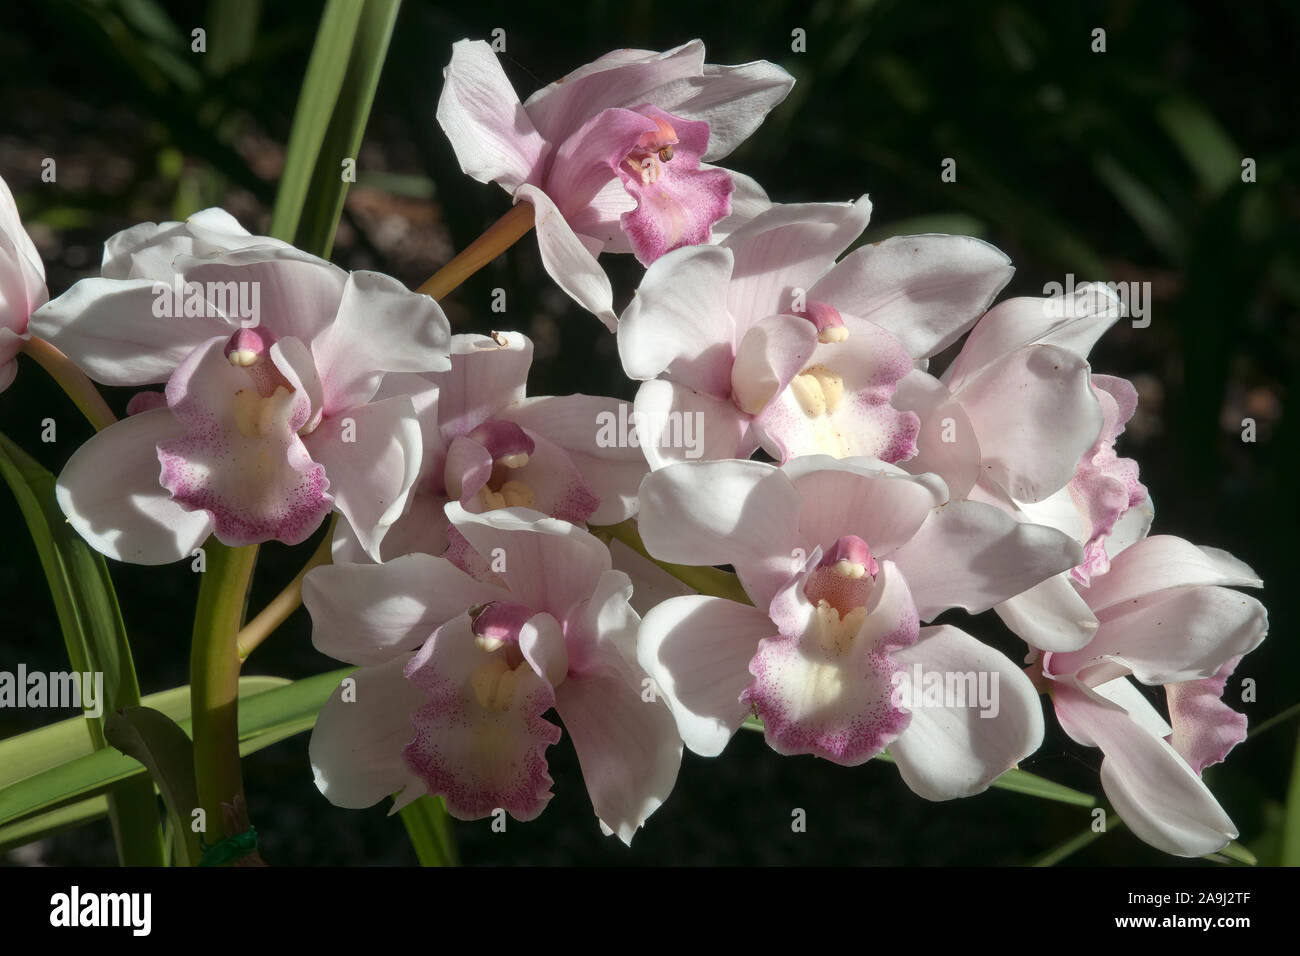 Sydney Australia, stem of pale pale pink orchid flowers in garden Stock Photo